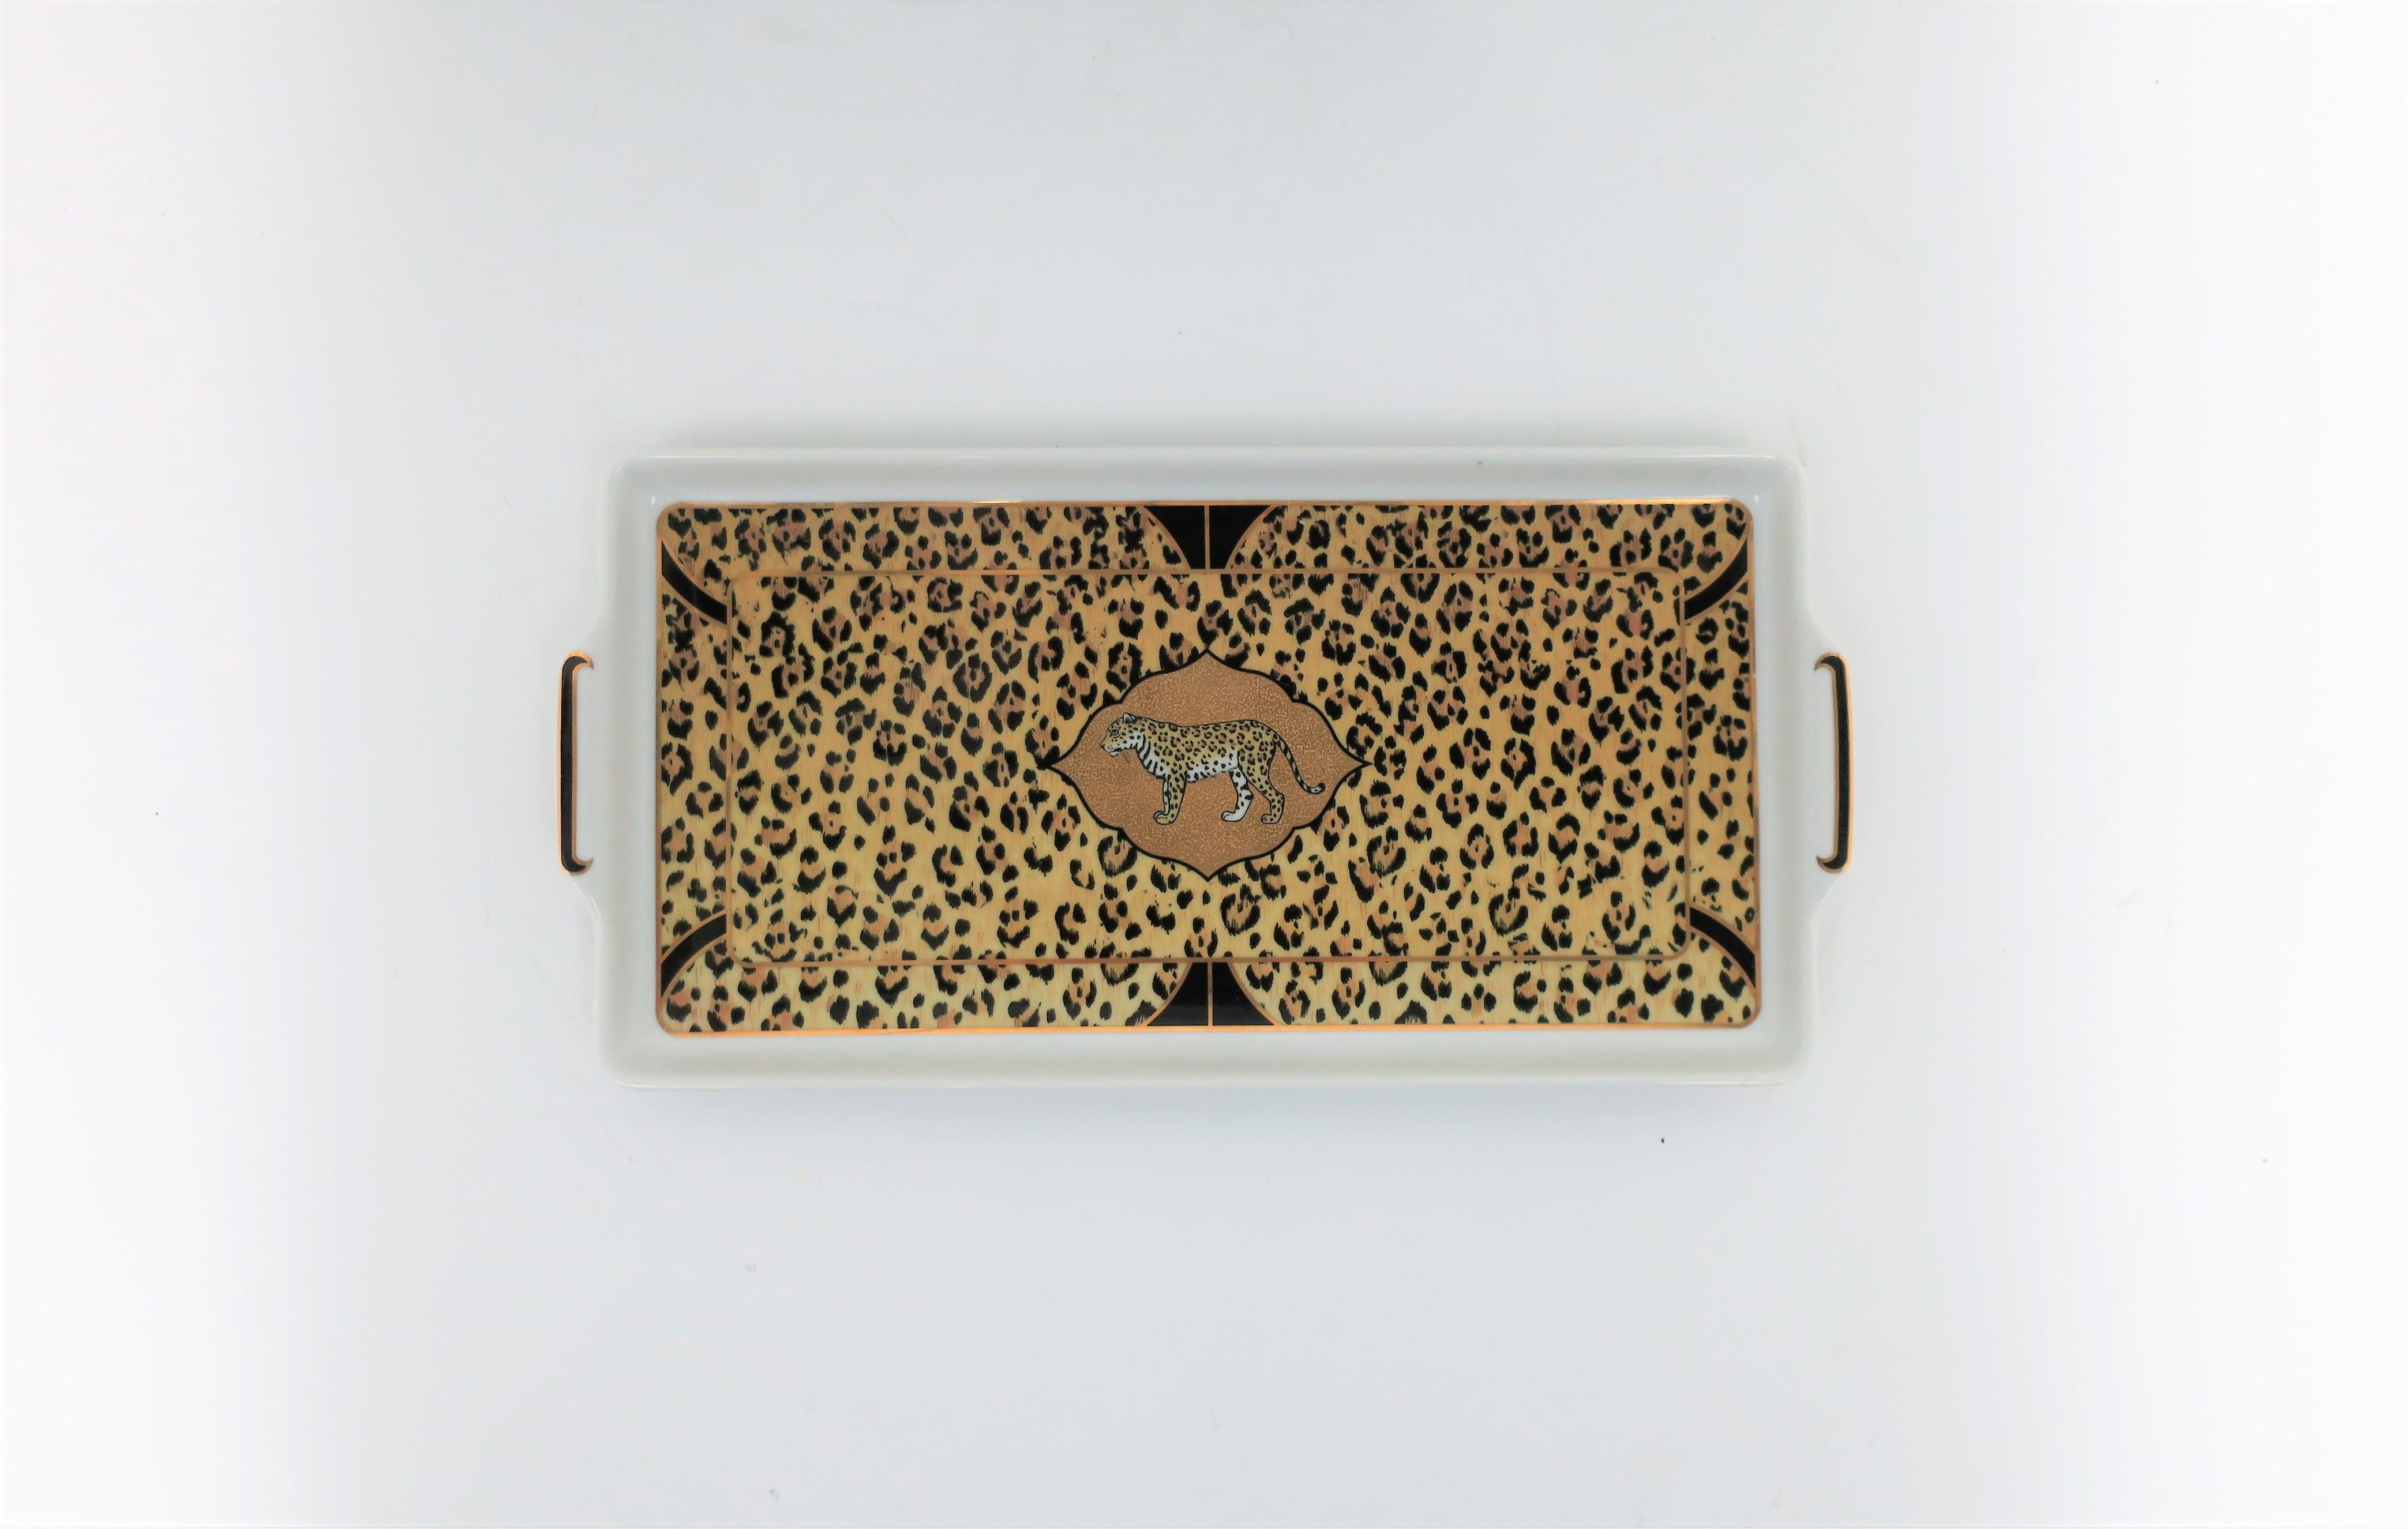 A beautiful '90s designer 'Amazonian Jaguar' cat porcelain rectangular serving tray, by Lynn Chase, 1994, circa late-20th century. A porcelain tray, with animal print design and center jaguar cat, in tan, black and 24-karart gold. Tray can be used